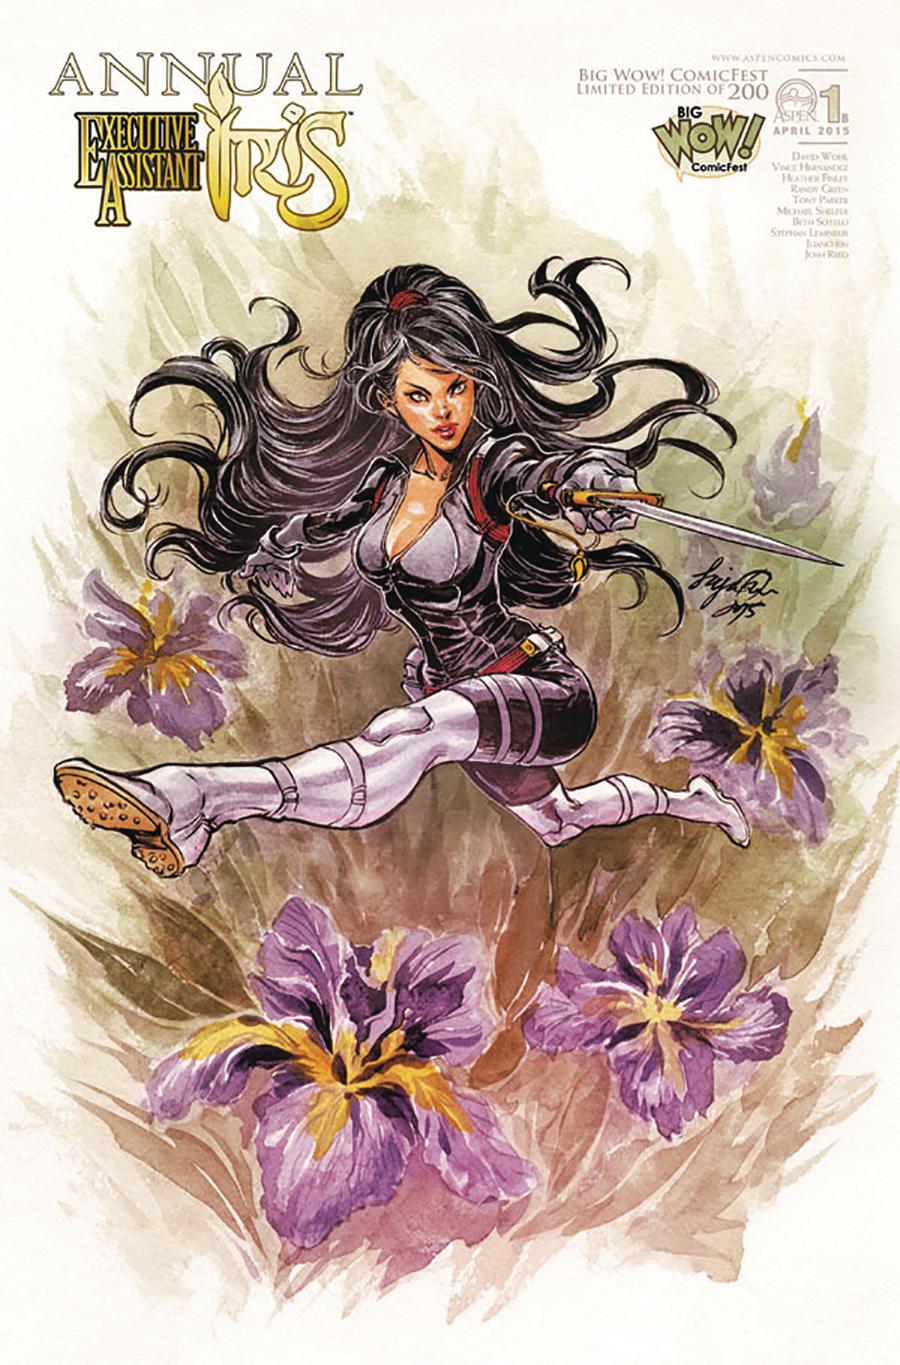 Executive Assistant Iris Vol 3 Annual #1 Cover B Big Wow ComicFest 2015 Exclusive Siya Oum Variant Cover